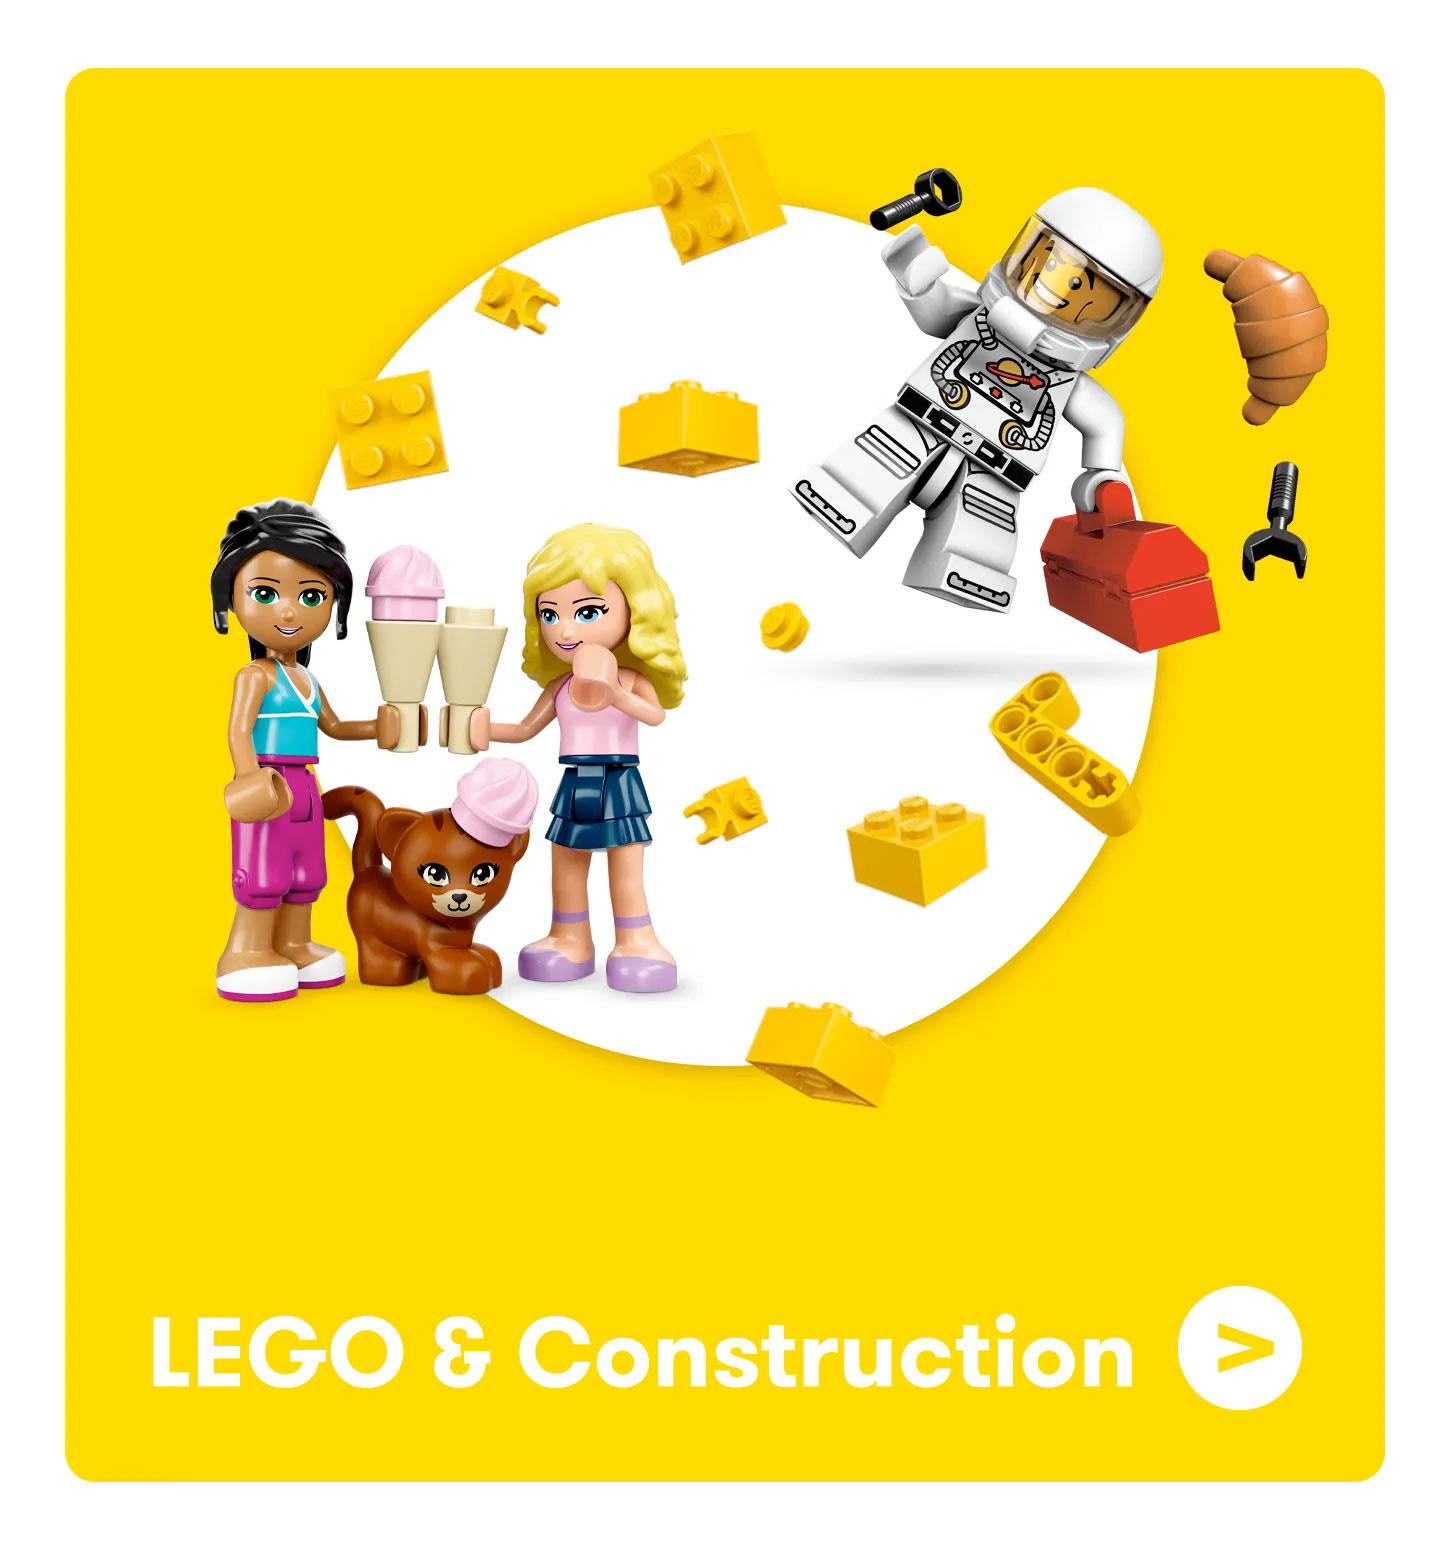 Lego and Construction